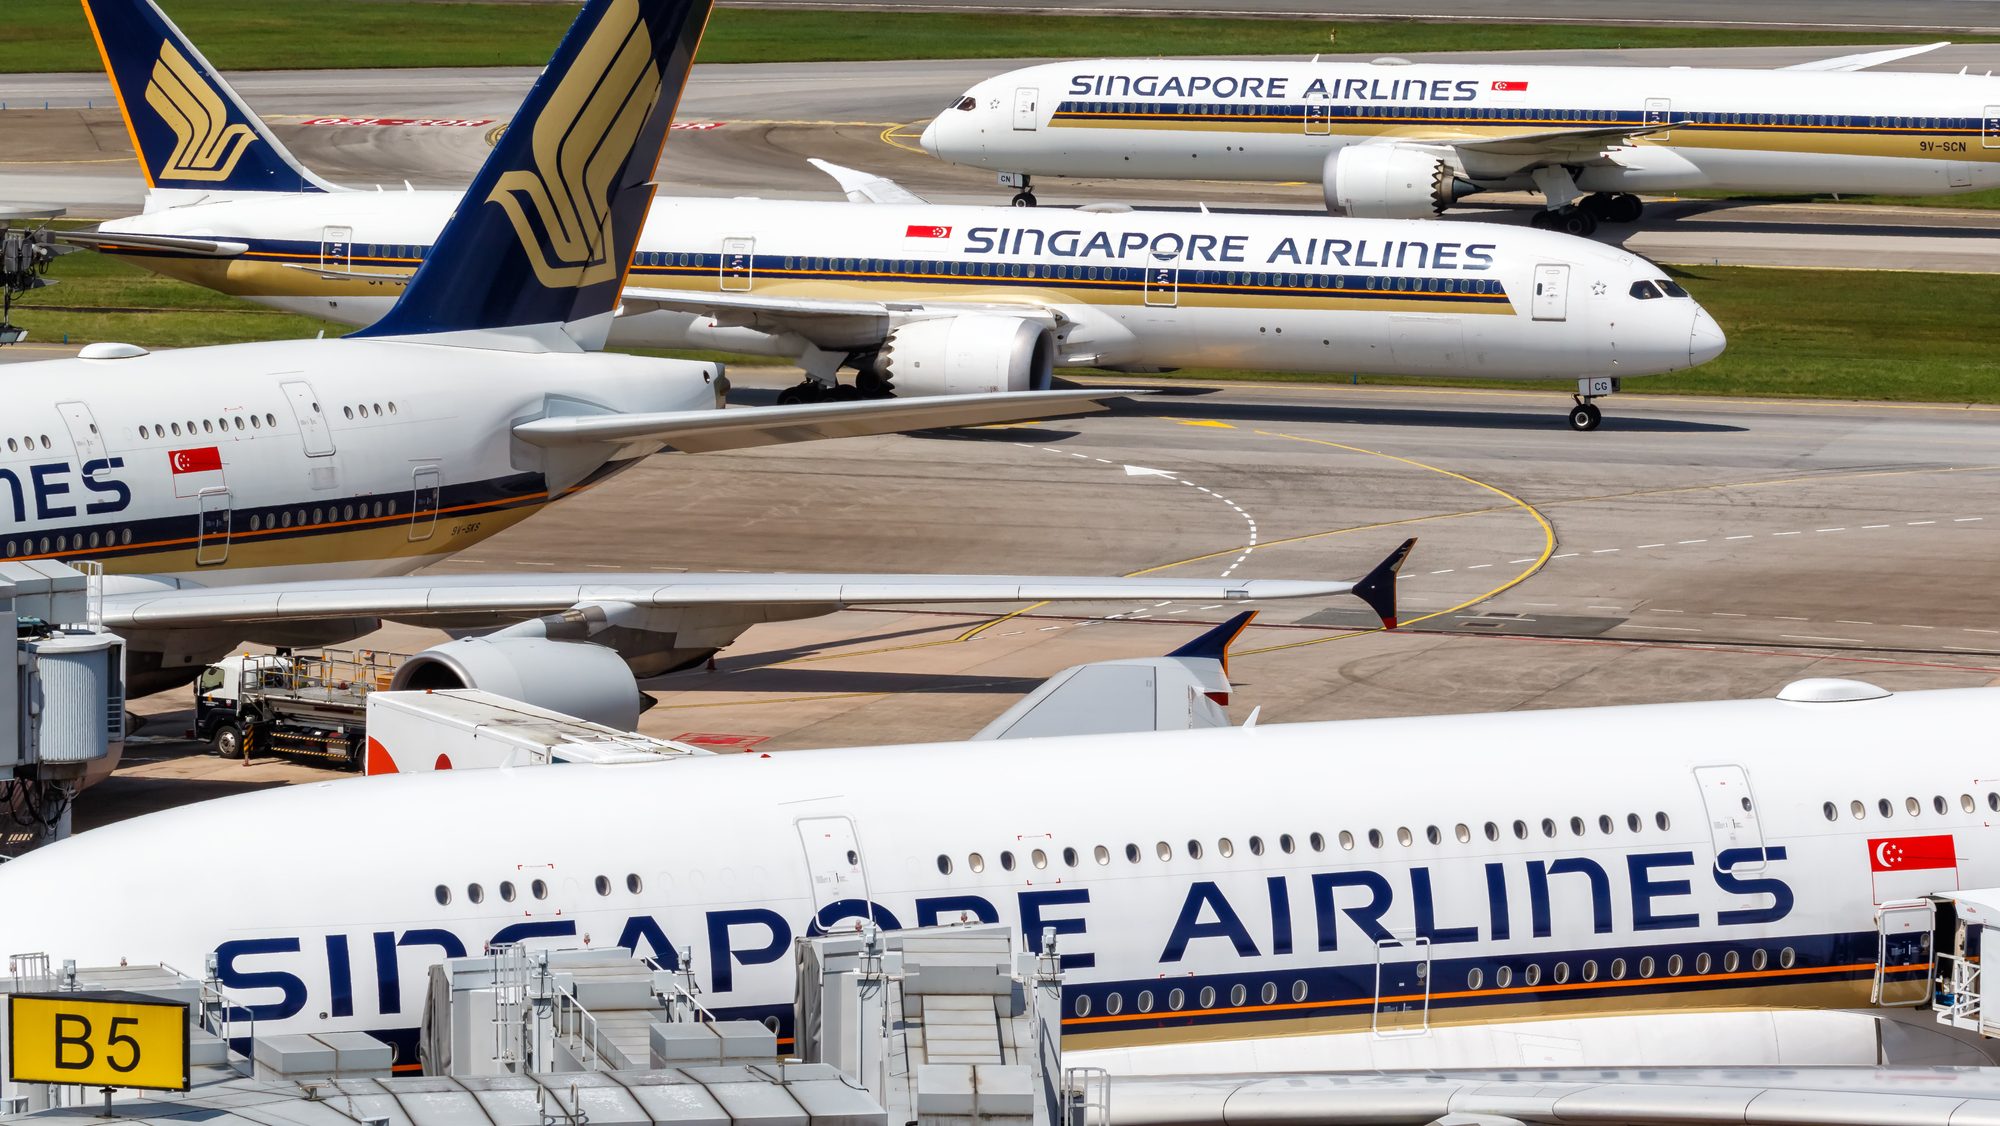 Singapore Airlines airplanes at Changi Airport in Singapore